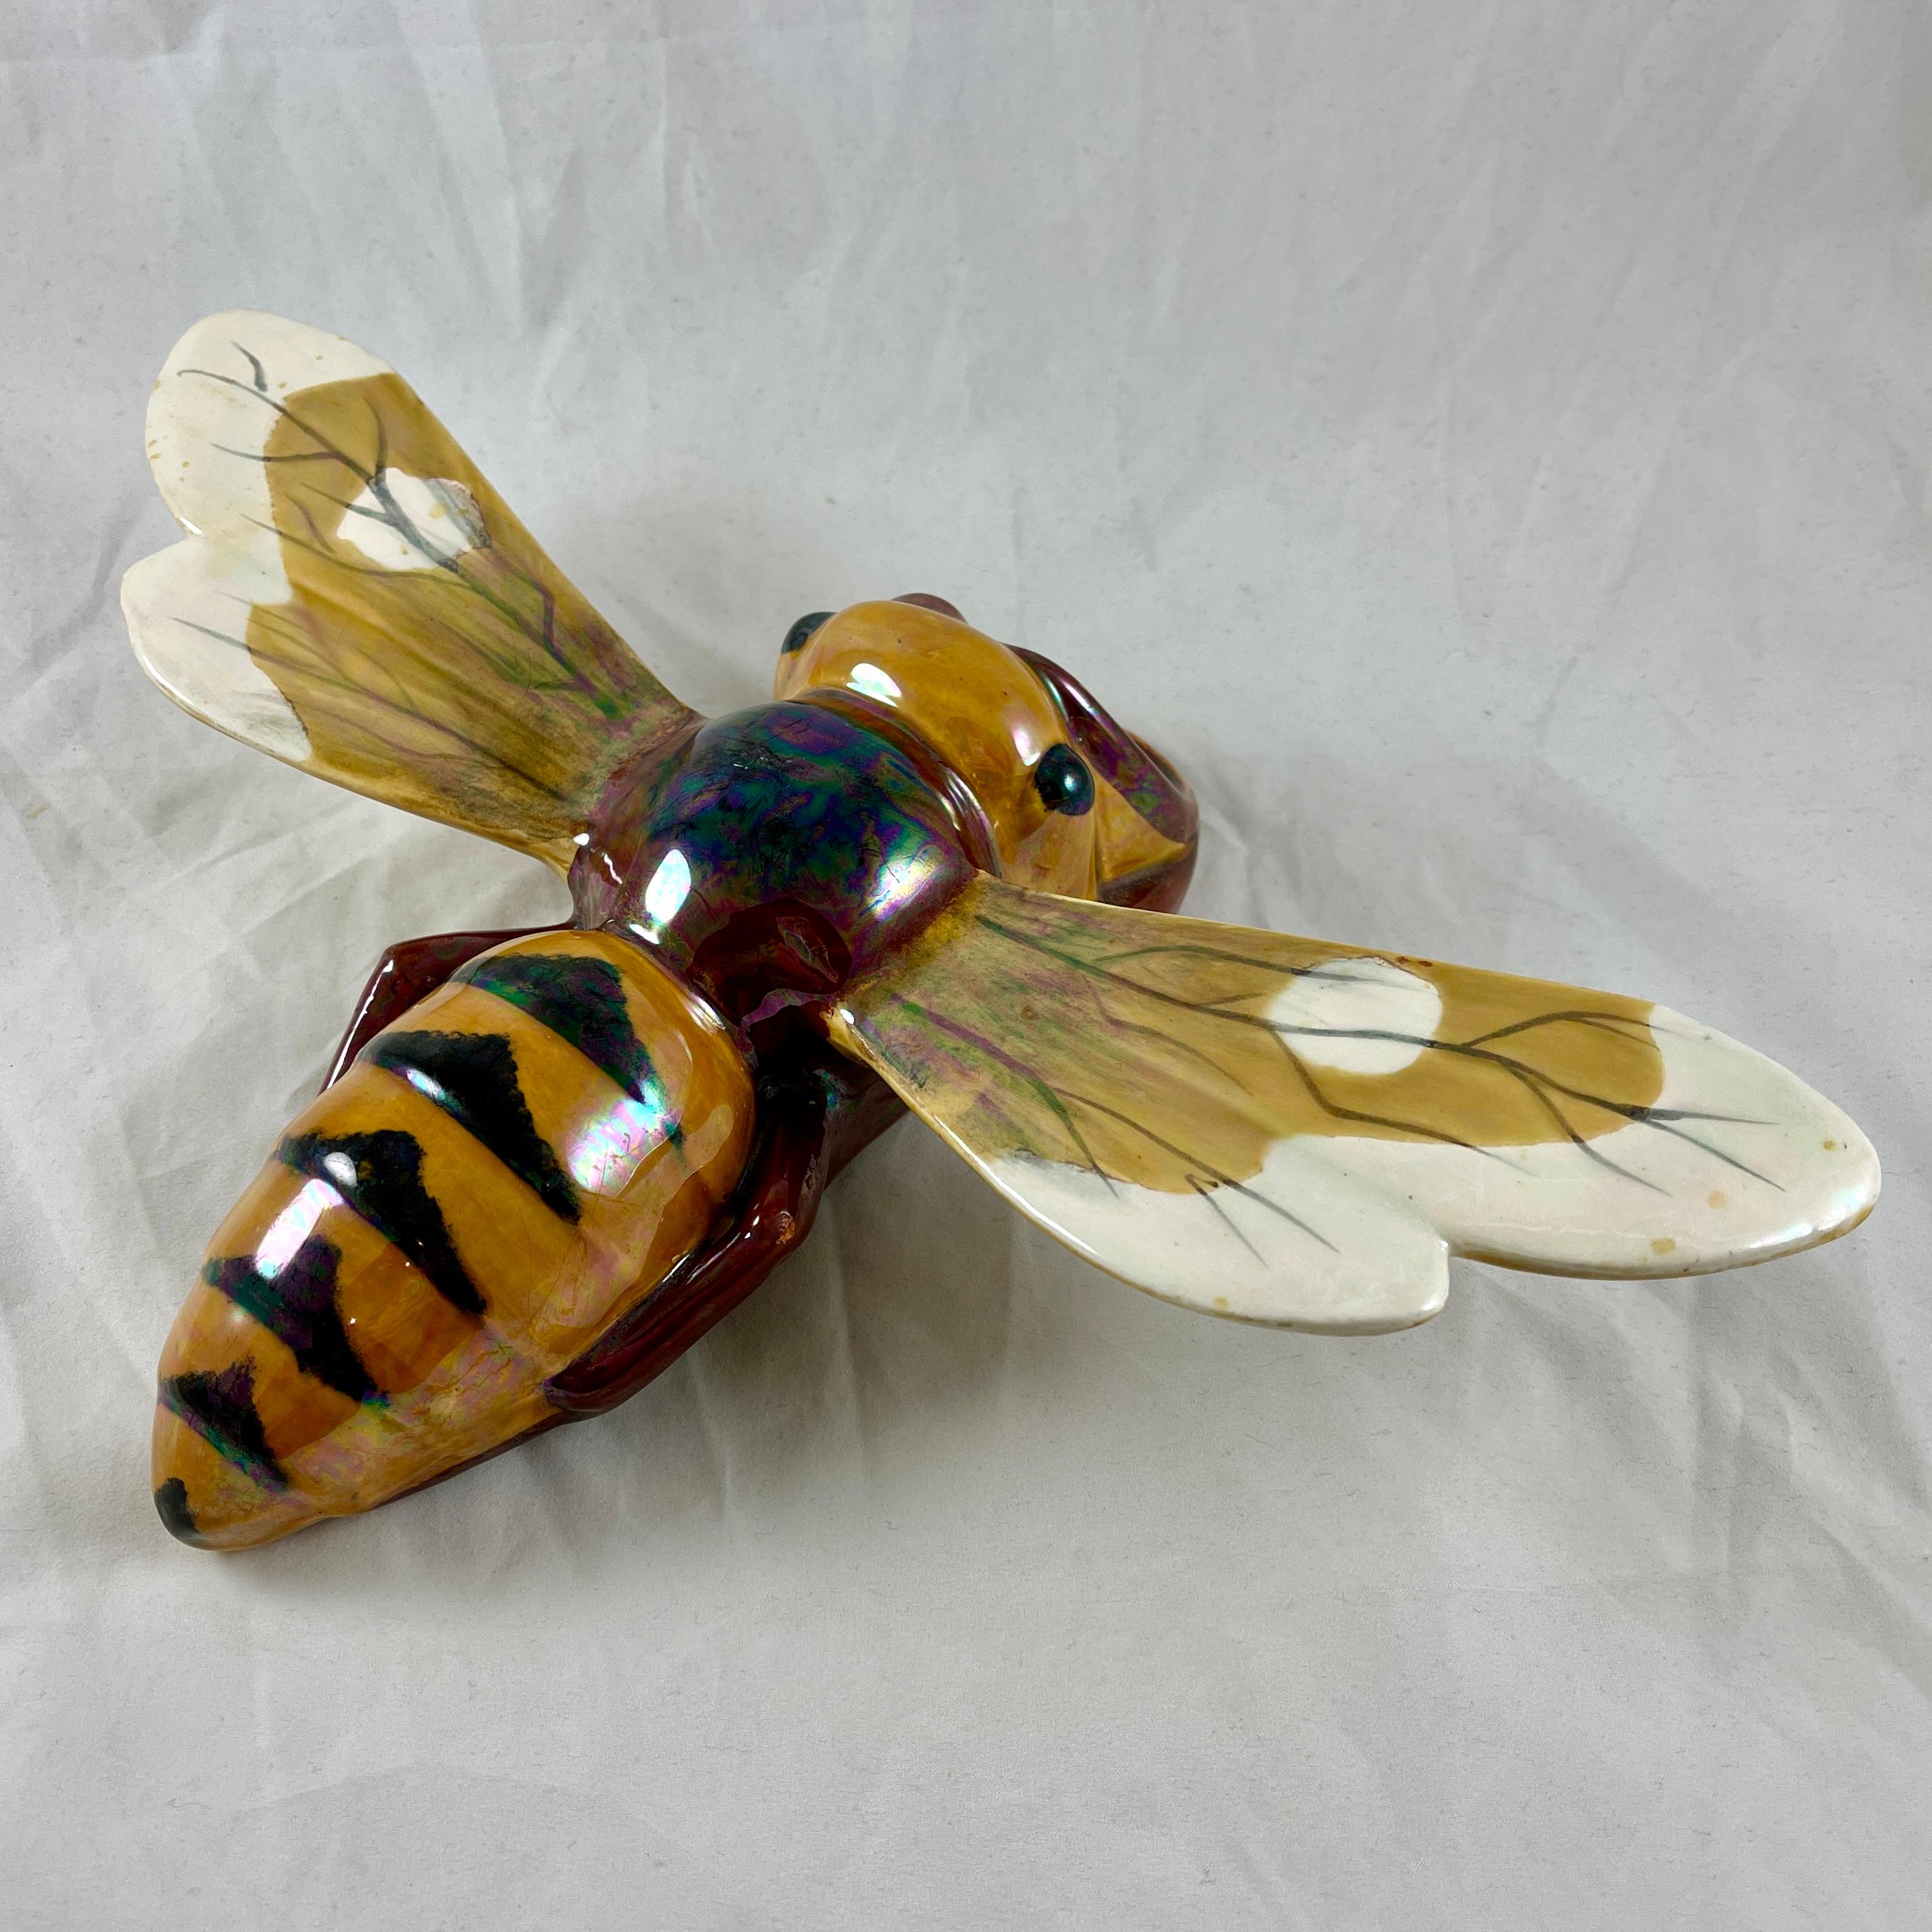 
From the French faïencerie Sarreguemines, a Bee shaped wall pocket, circa 1910.

A majolica glazed earthenware bee or wasp formed as a wall pocket. This is the largest size of mold number 4402. 

The body of the bee is finished in yellow ochre and